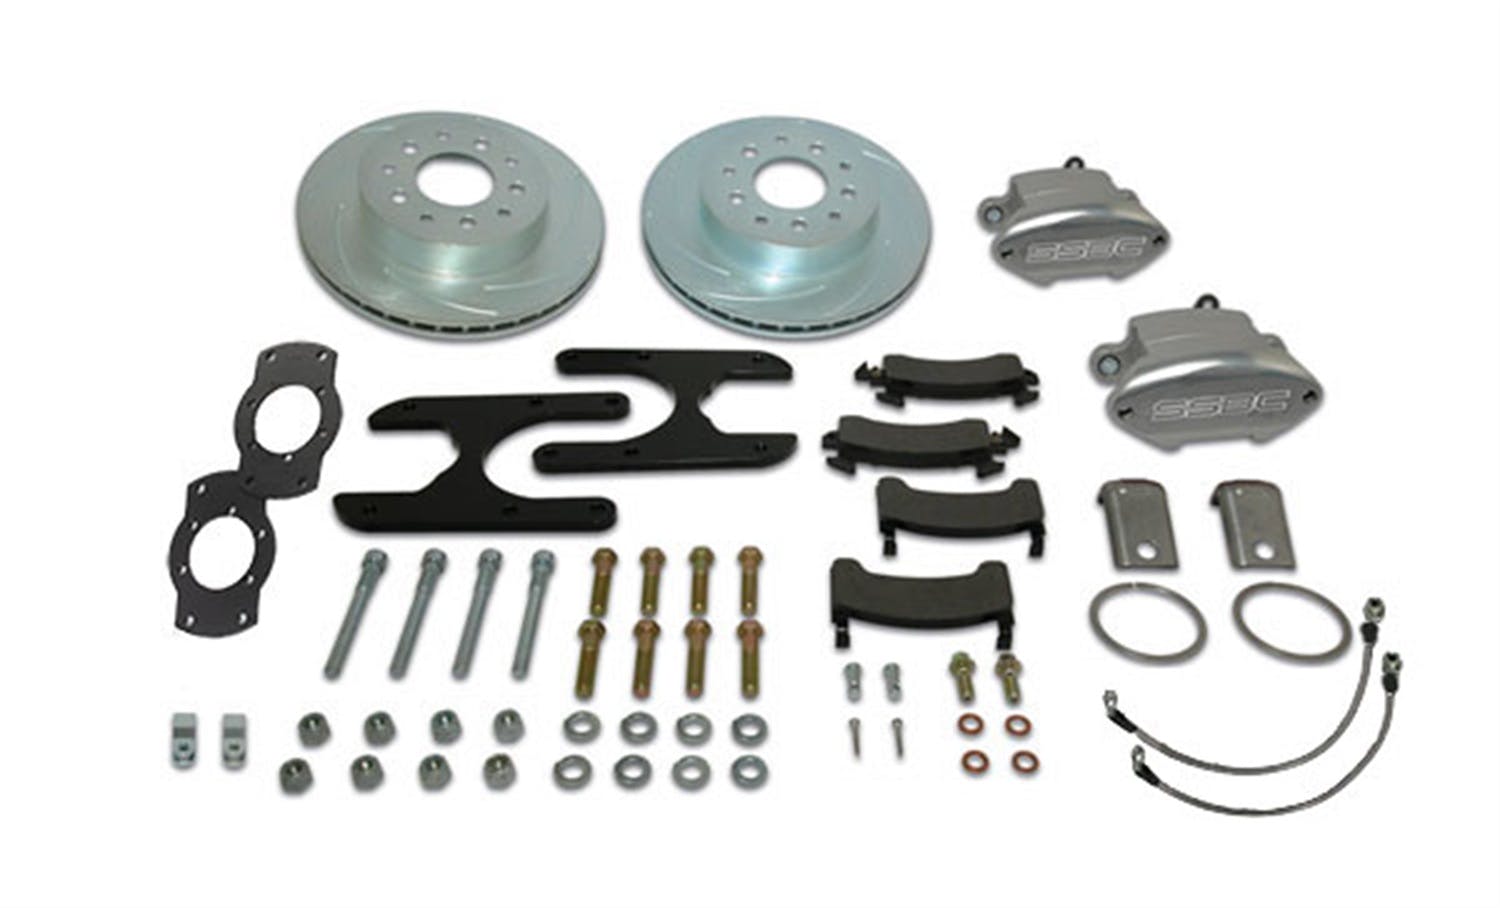 Stainless Steel Brakes A125-27BK Kit A125-27 w/black calipers